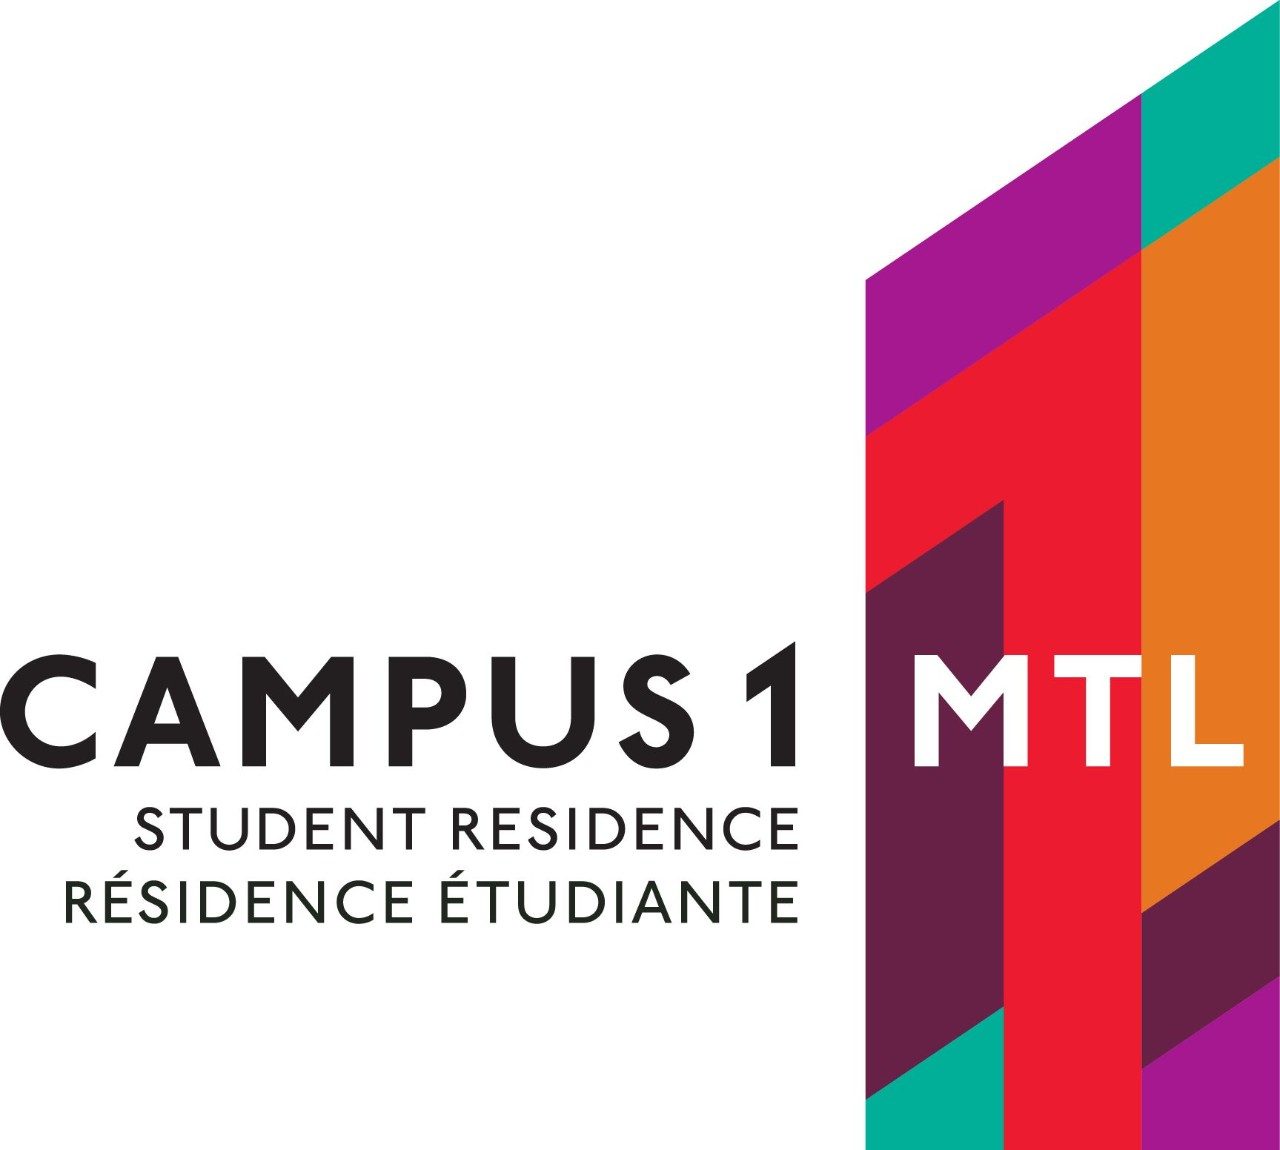 The logo of CAMPUS1 MTL student residence